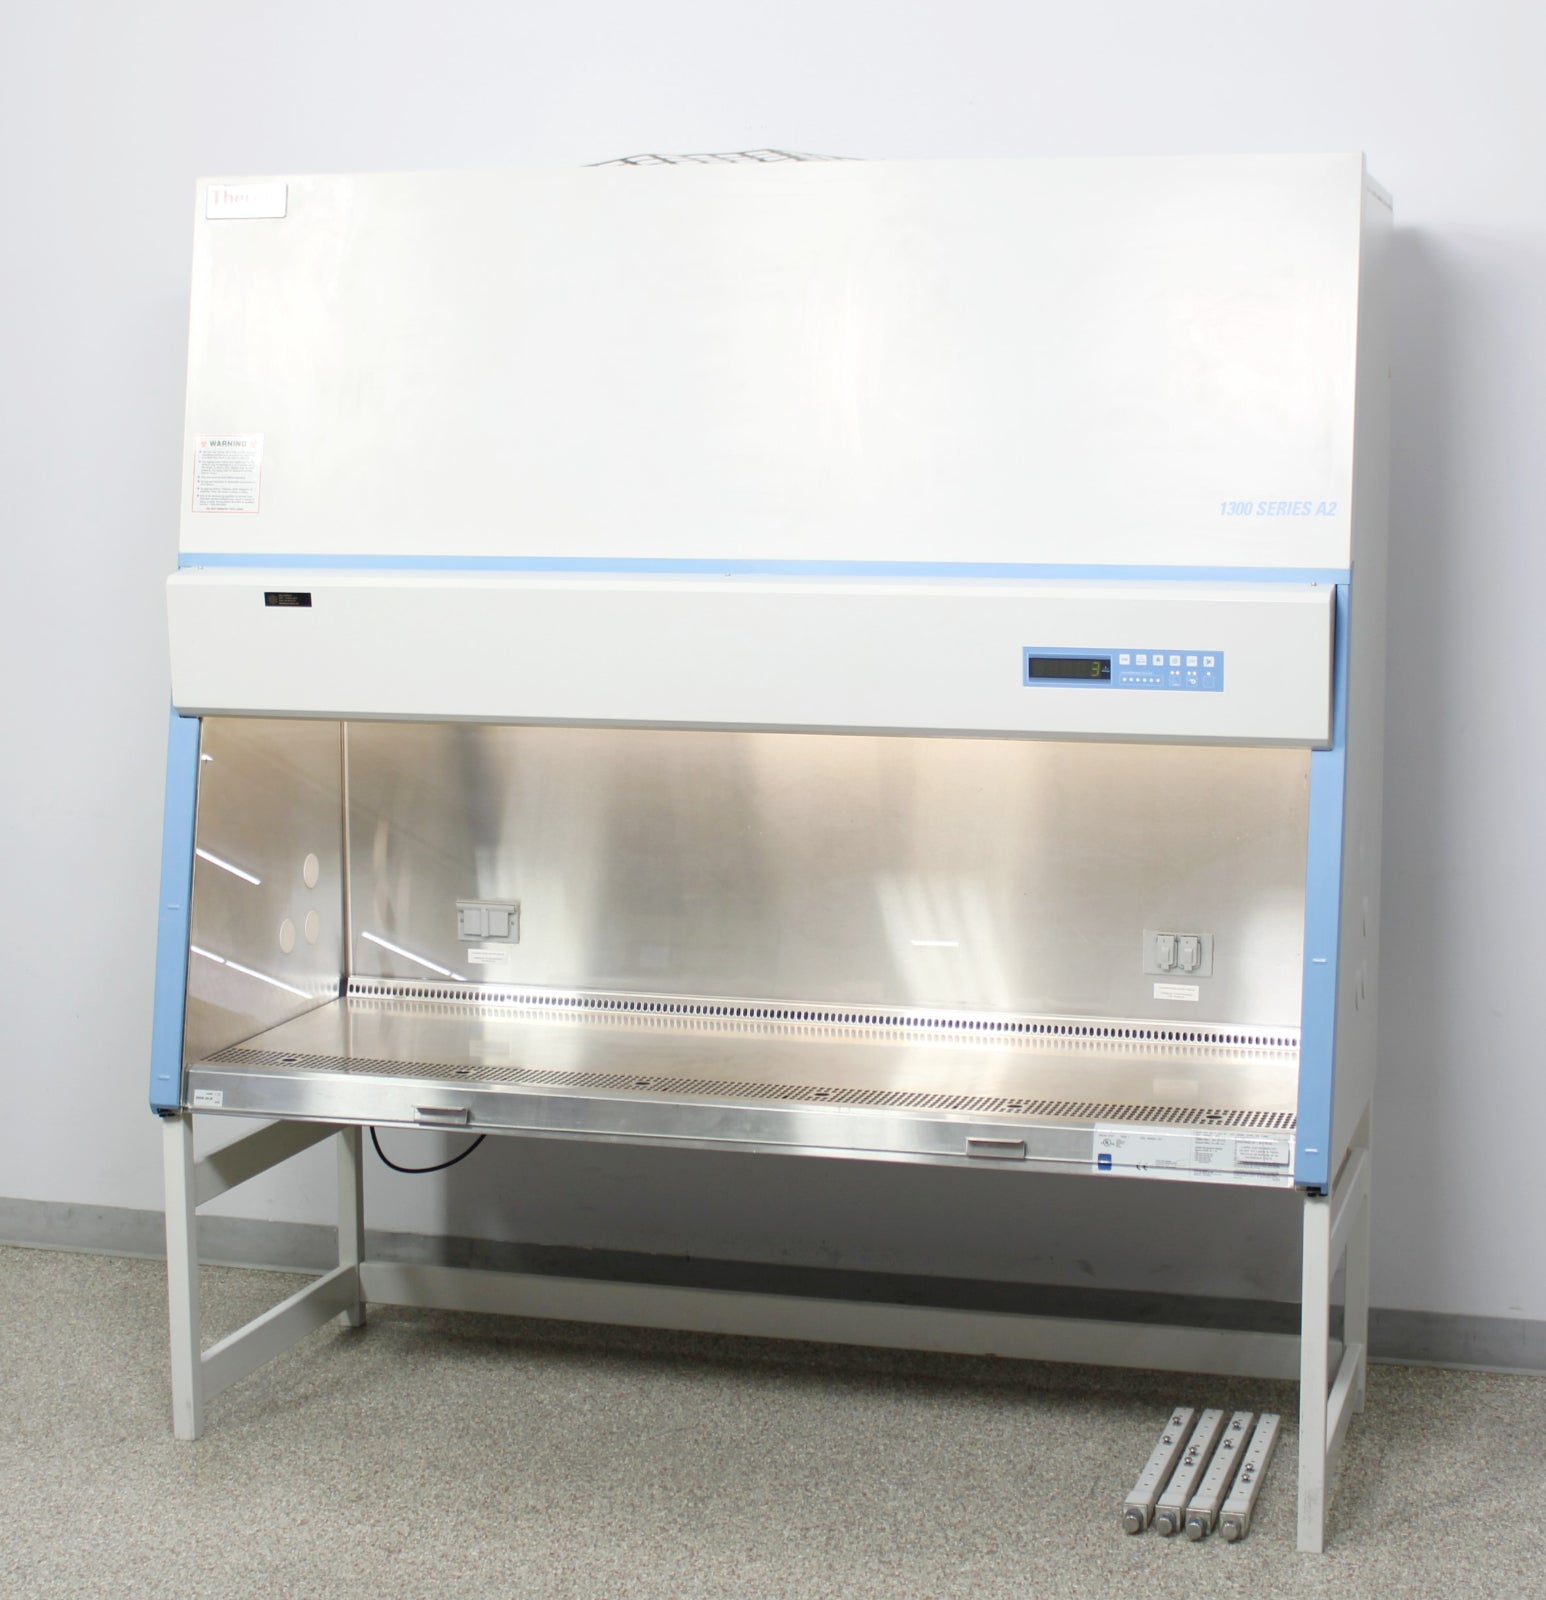 Thermo Scientific 1300 Series 6ft Class